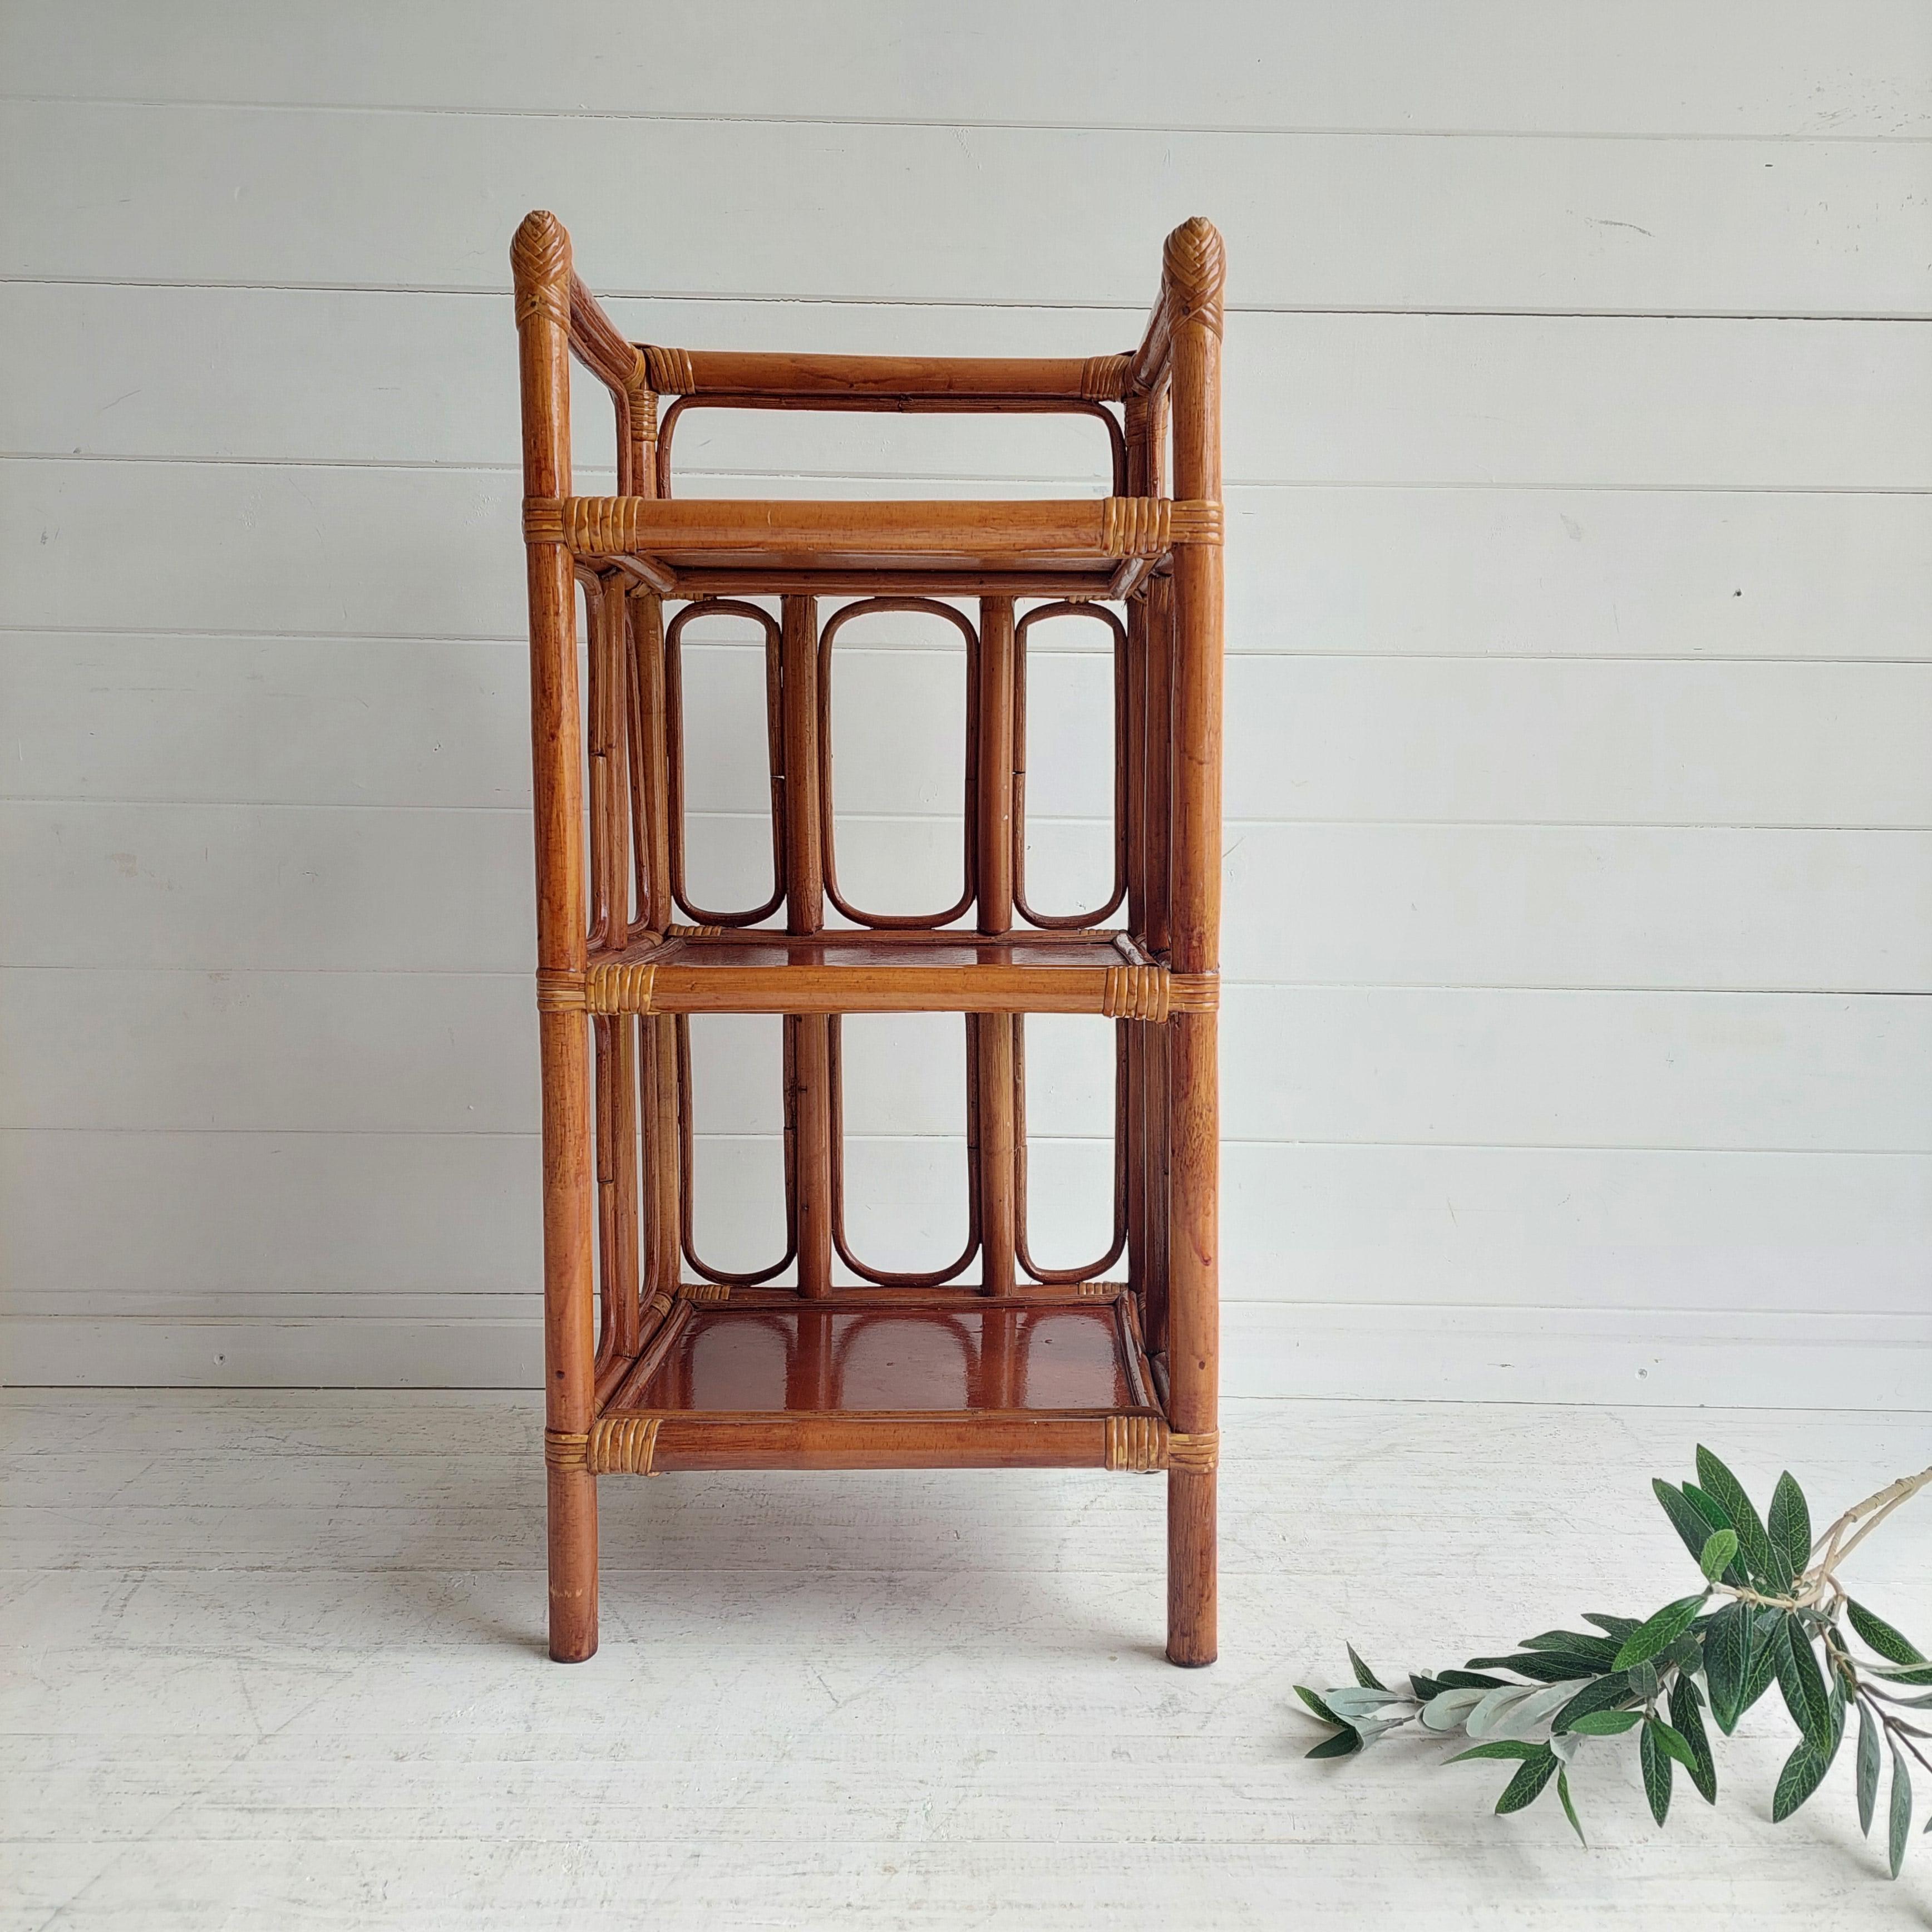 Vintage small bamboo wicker cane canework wooden. 
Three Tier Standing Shelf Shelving Unit Display Plinth Wall stand circa1960s

French vintage bamboo display stand with three shelves. Solid framework, heavy with decorative cane ovals at the